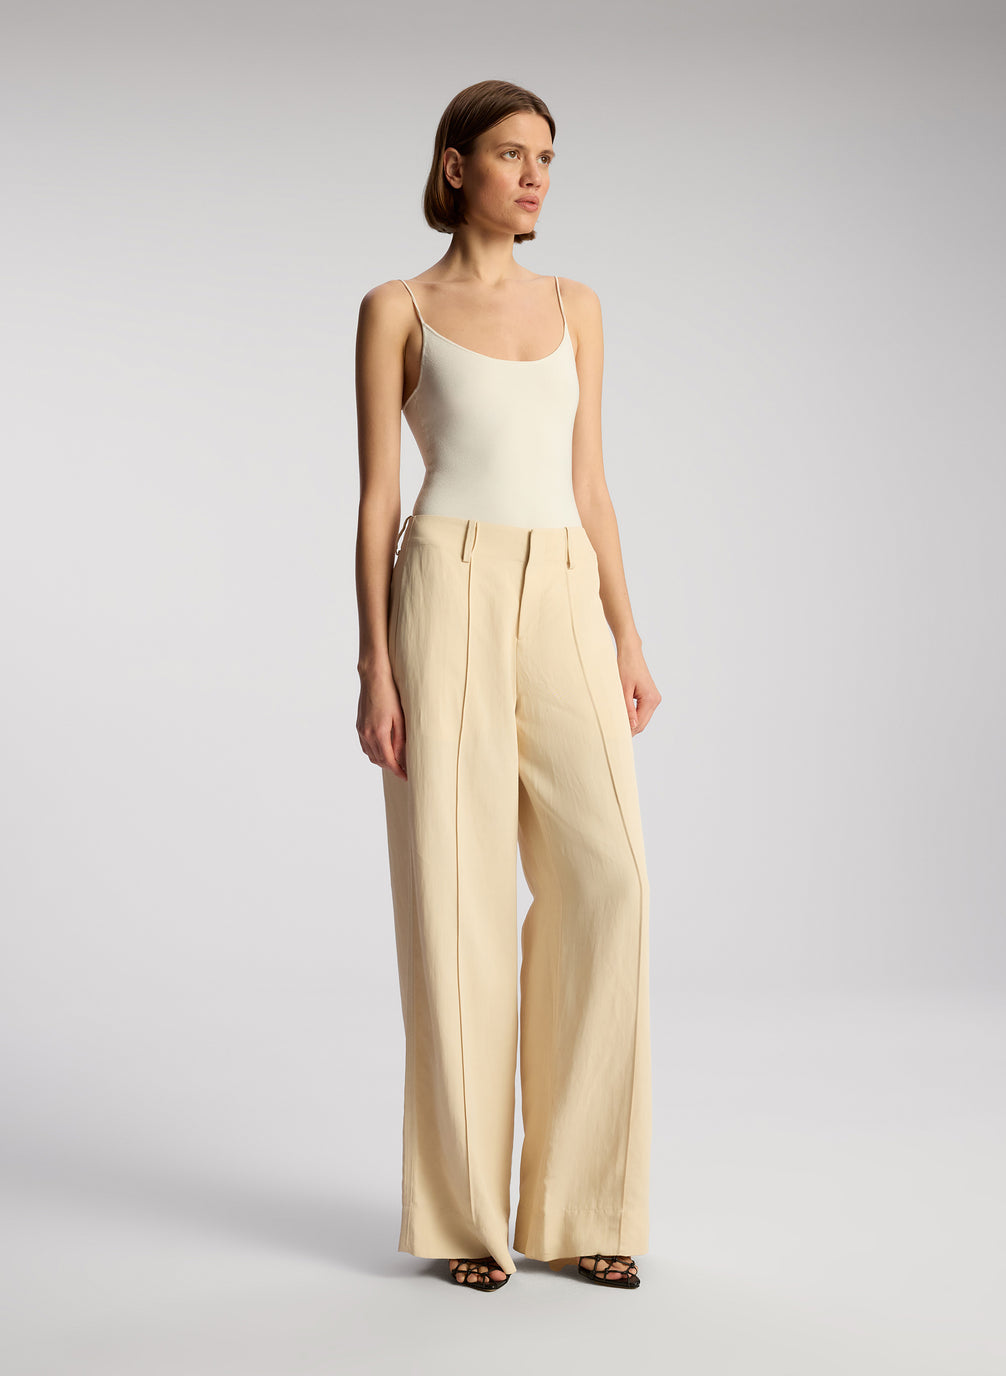 side view of woman wearing off white bodysuit and beige wide leg pants